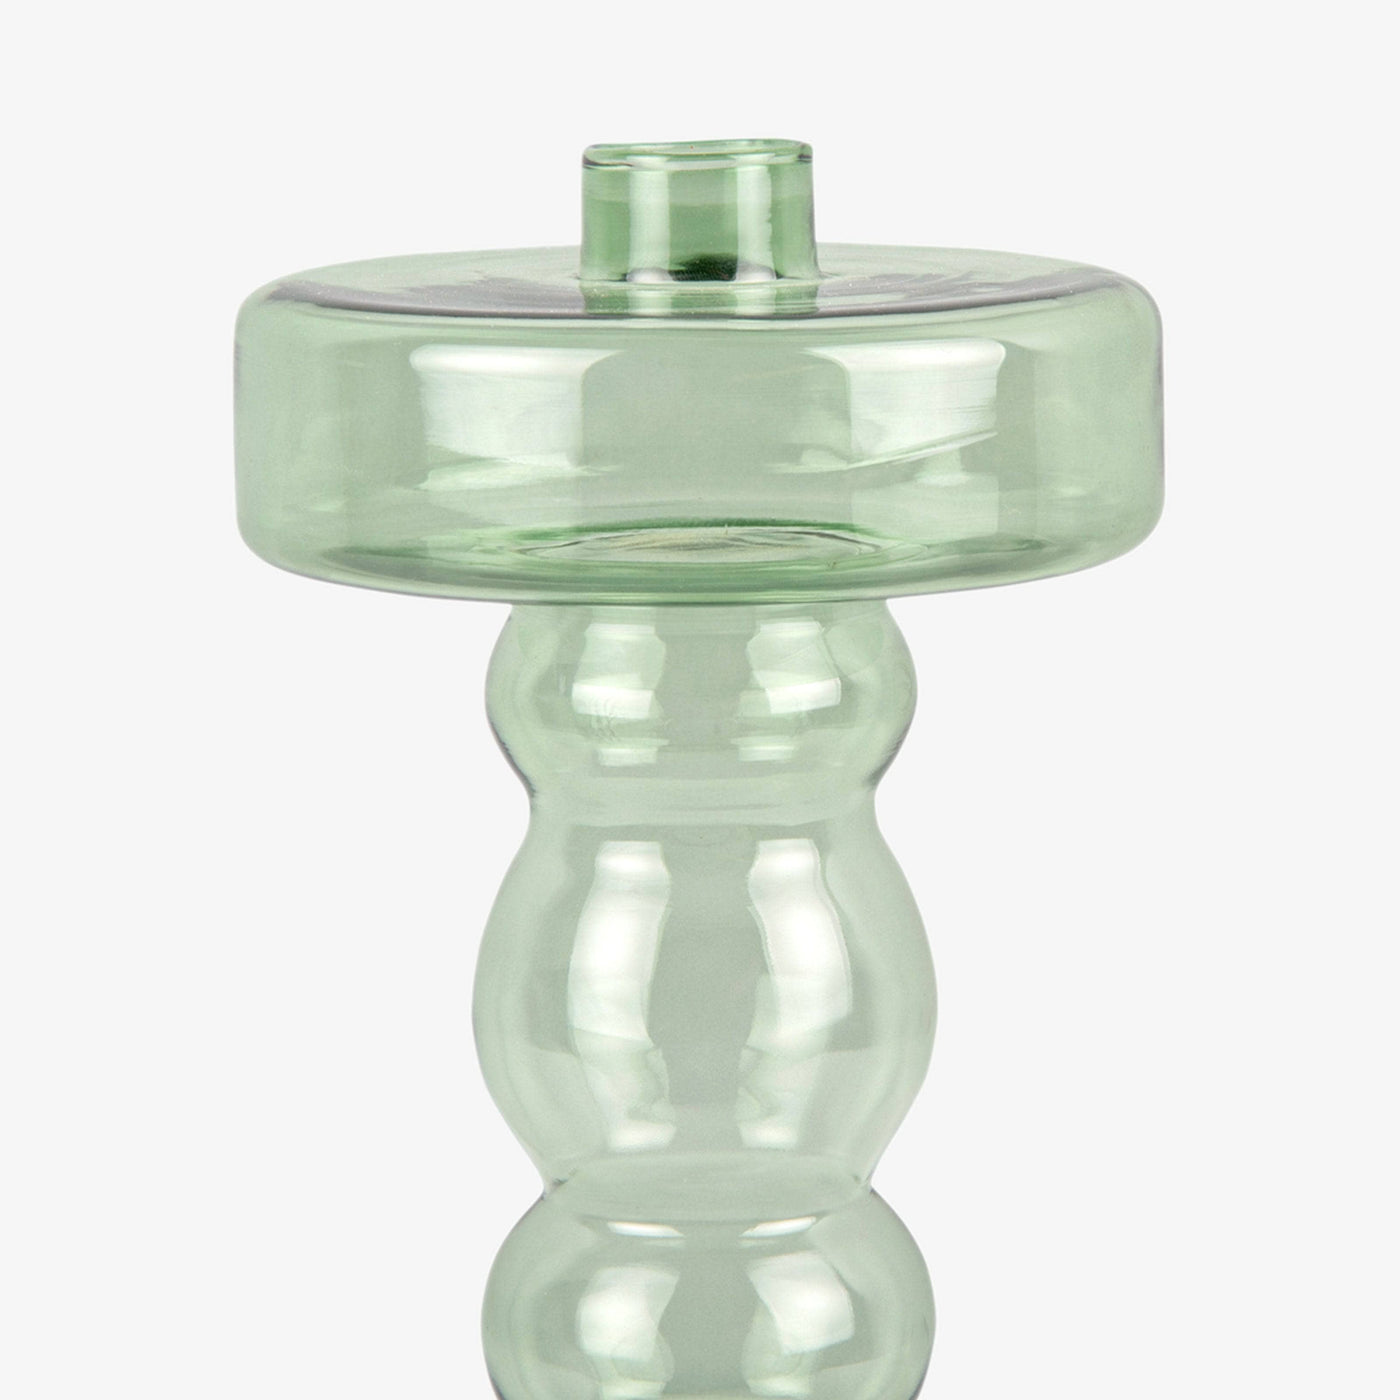 Ludou Candle Holder, Glass, Jungle Green, XL Candle Holders sazy.com